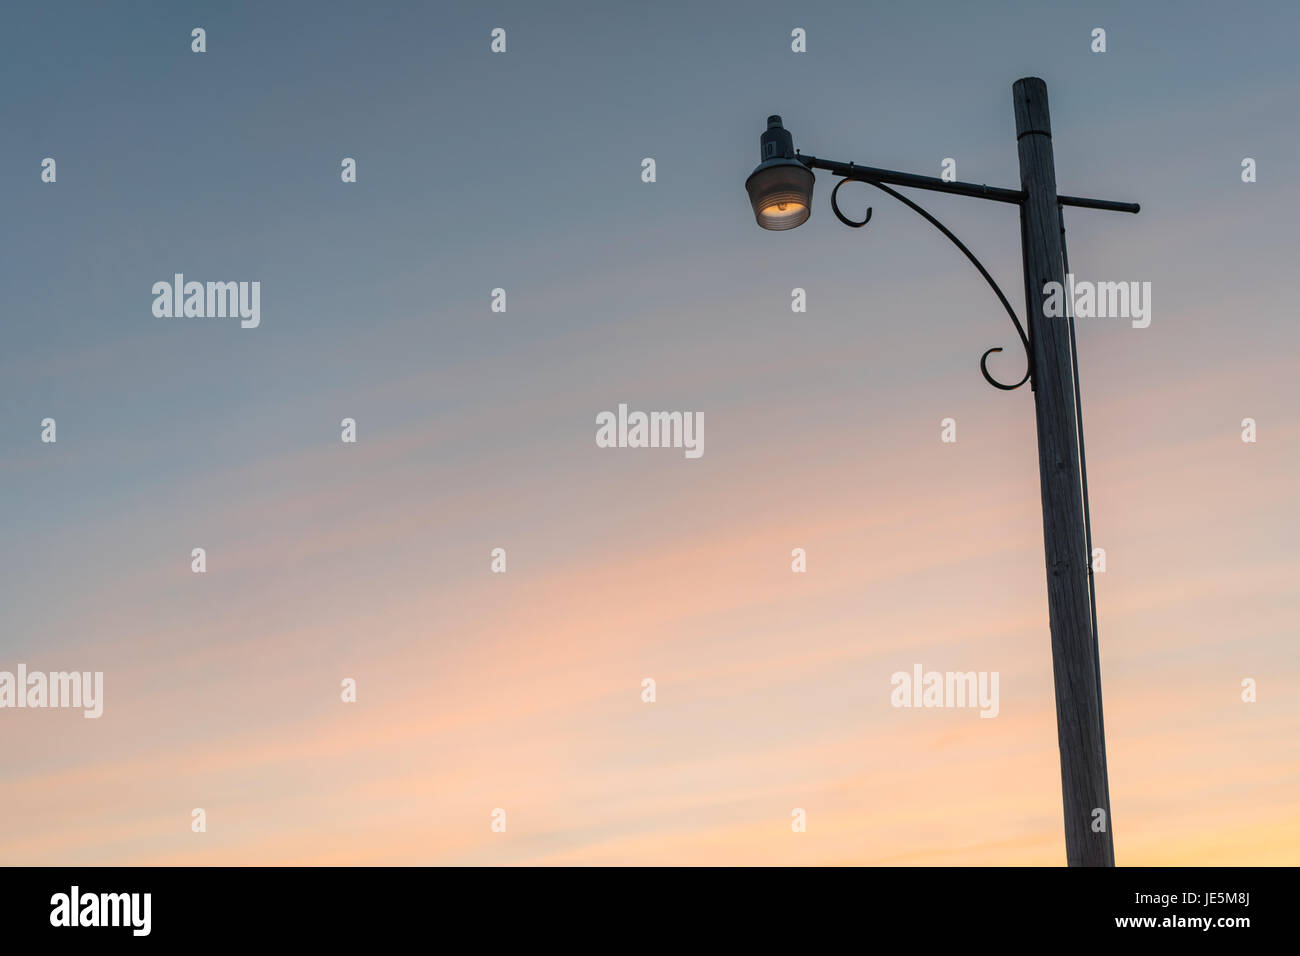 A lamp post at sunset Stock Photo